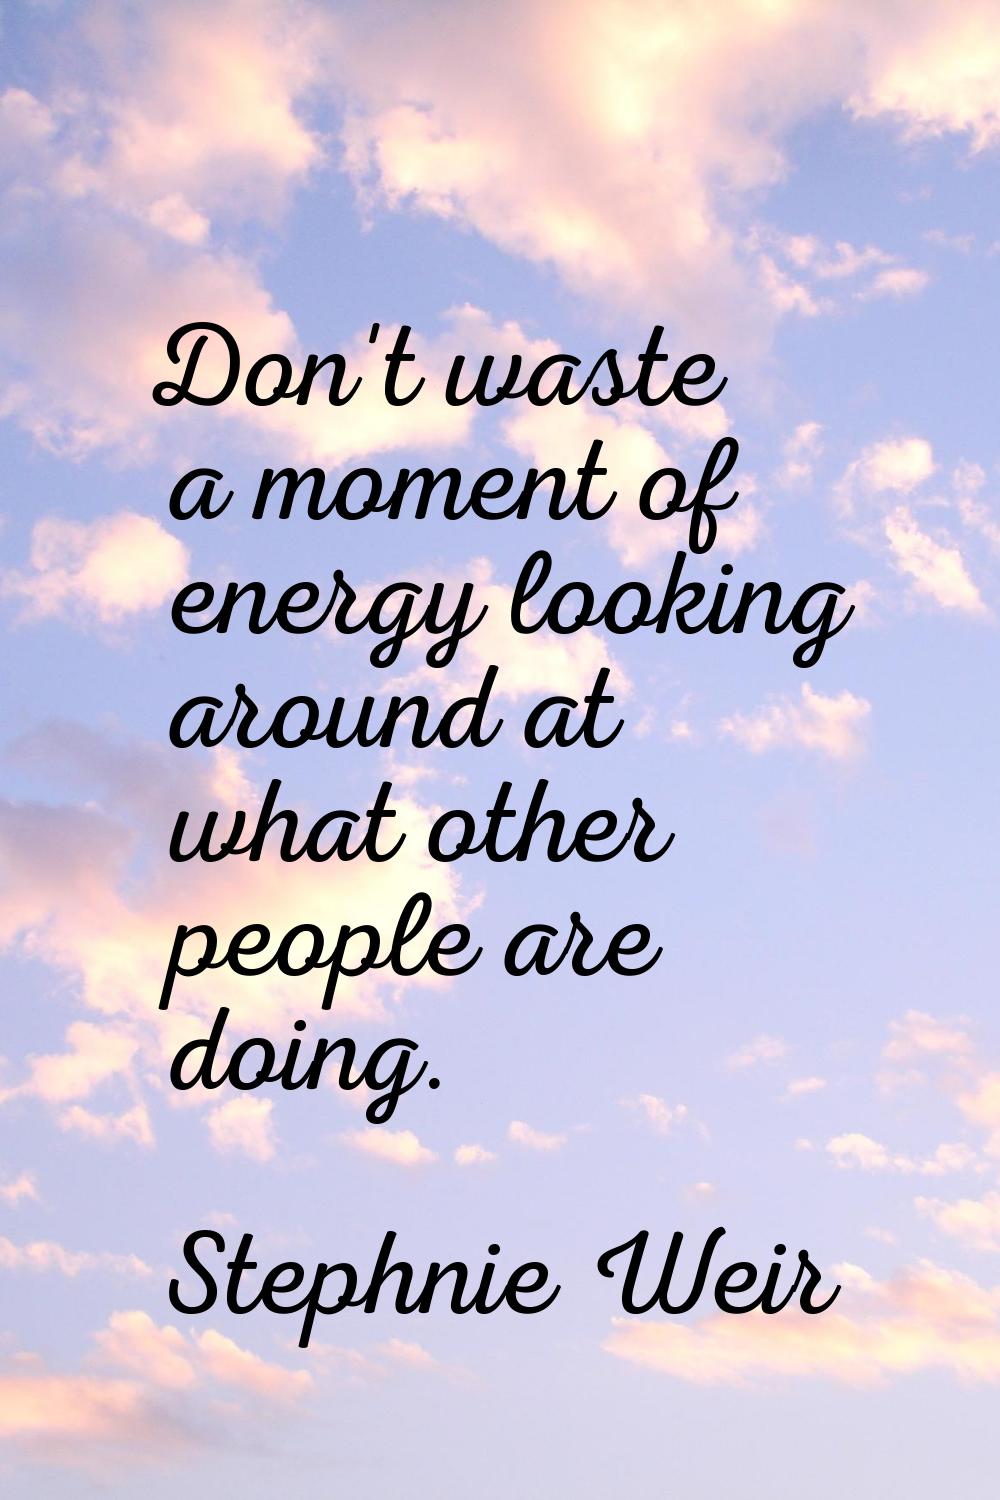 Don't waste a moment of energy looking around at what other people are doing.